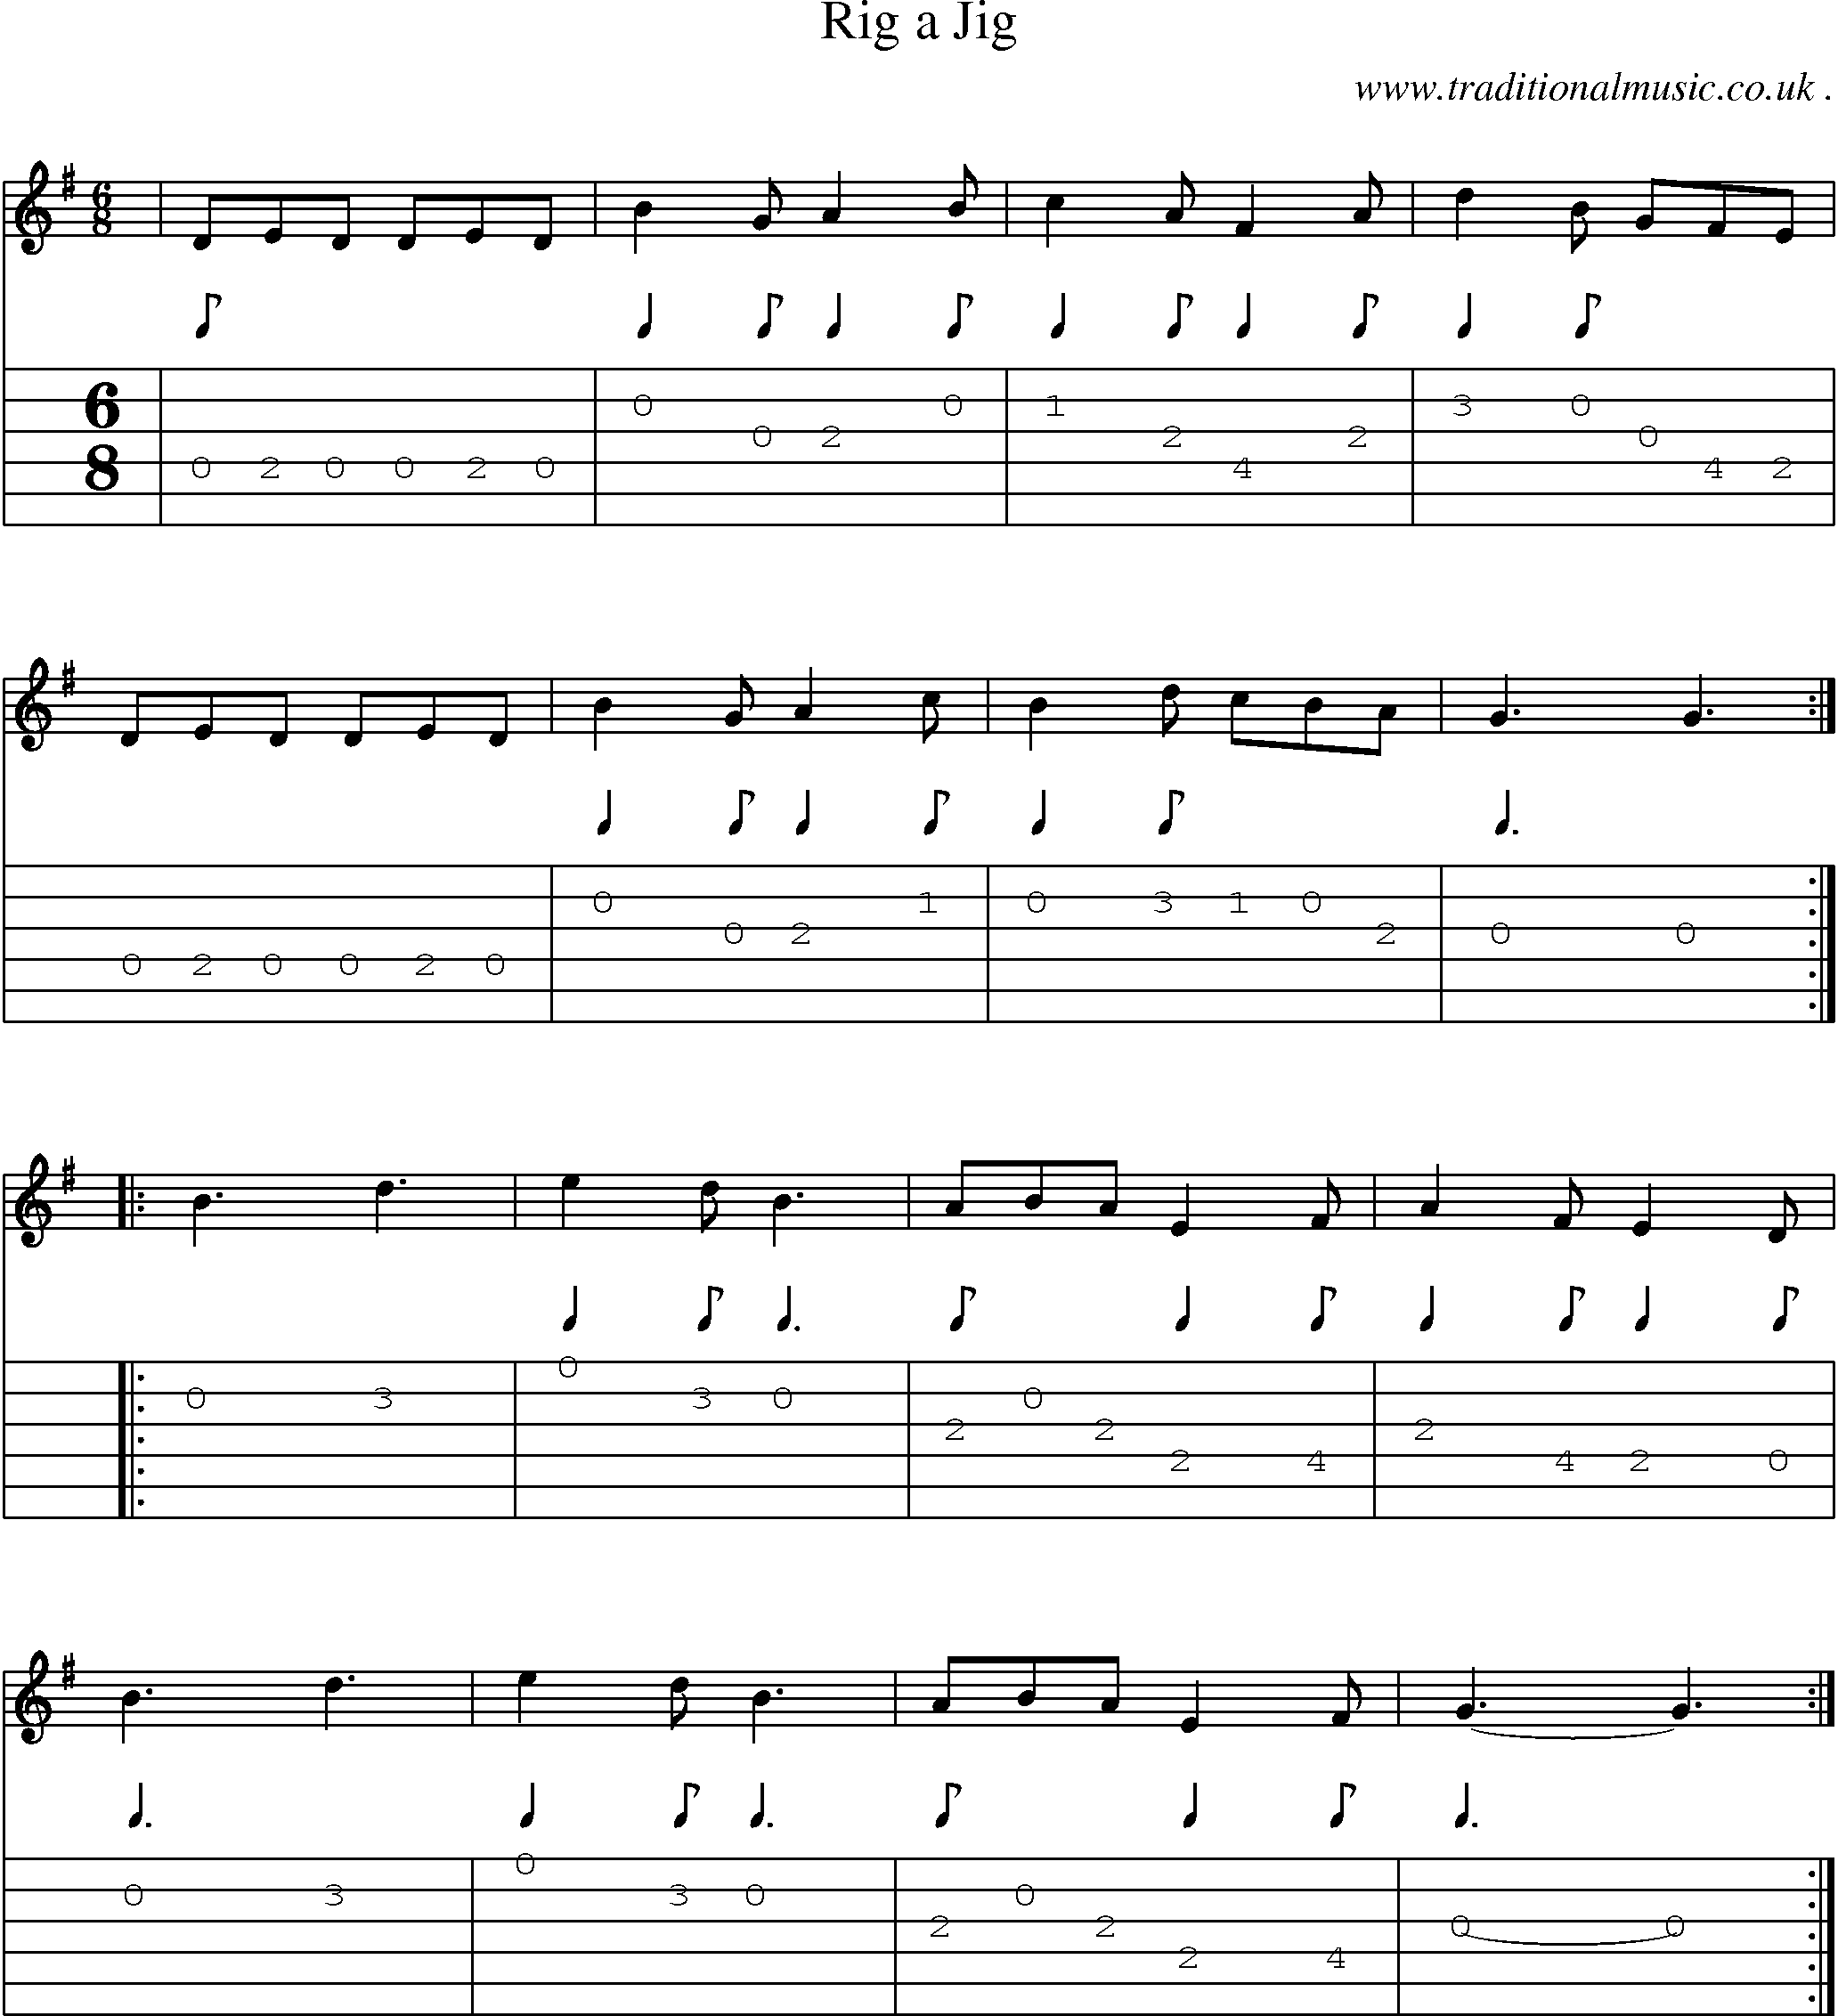 Sheet-Music and Guitar Tabs for Rig A Jig